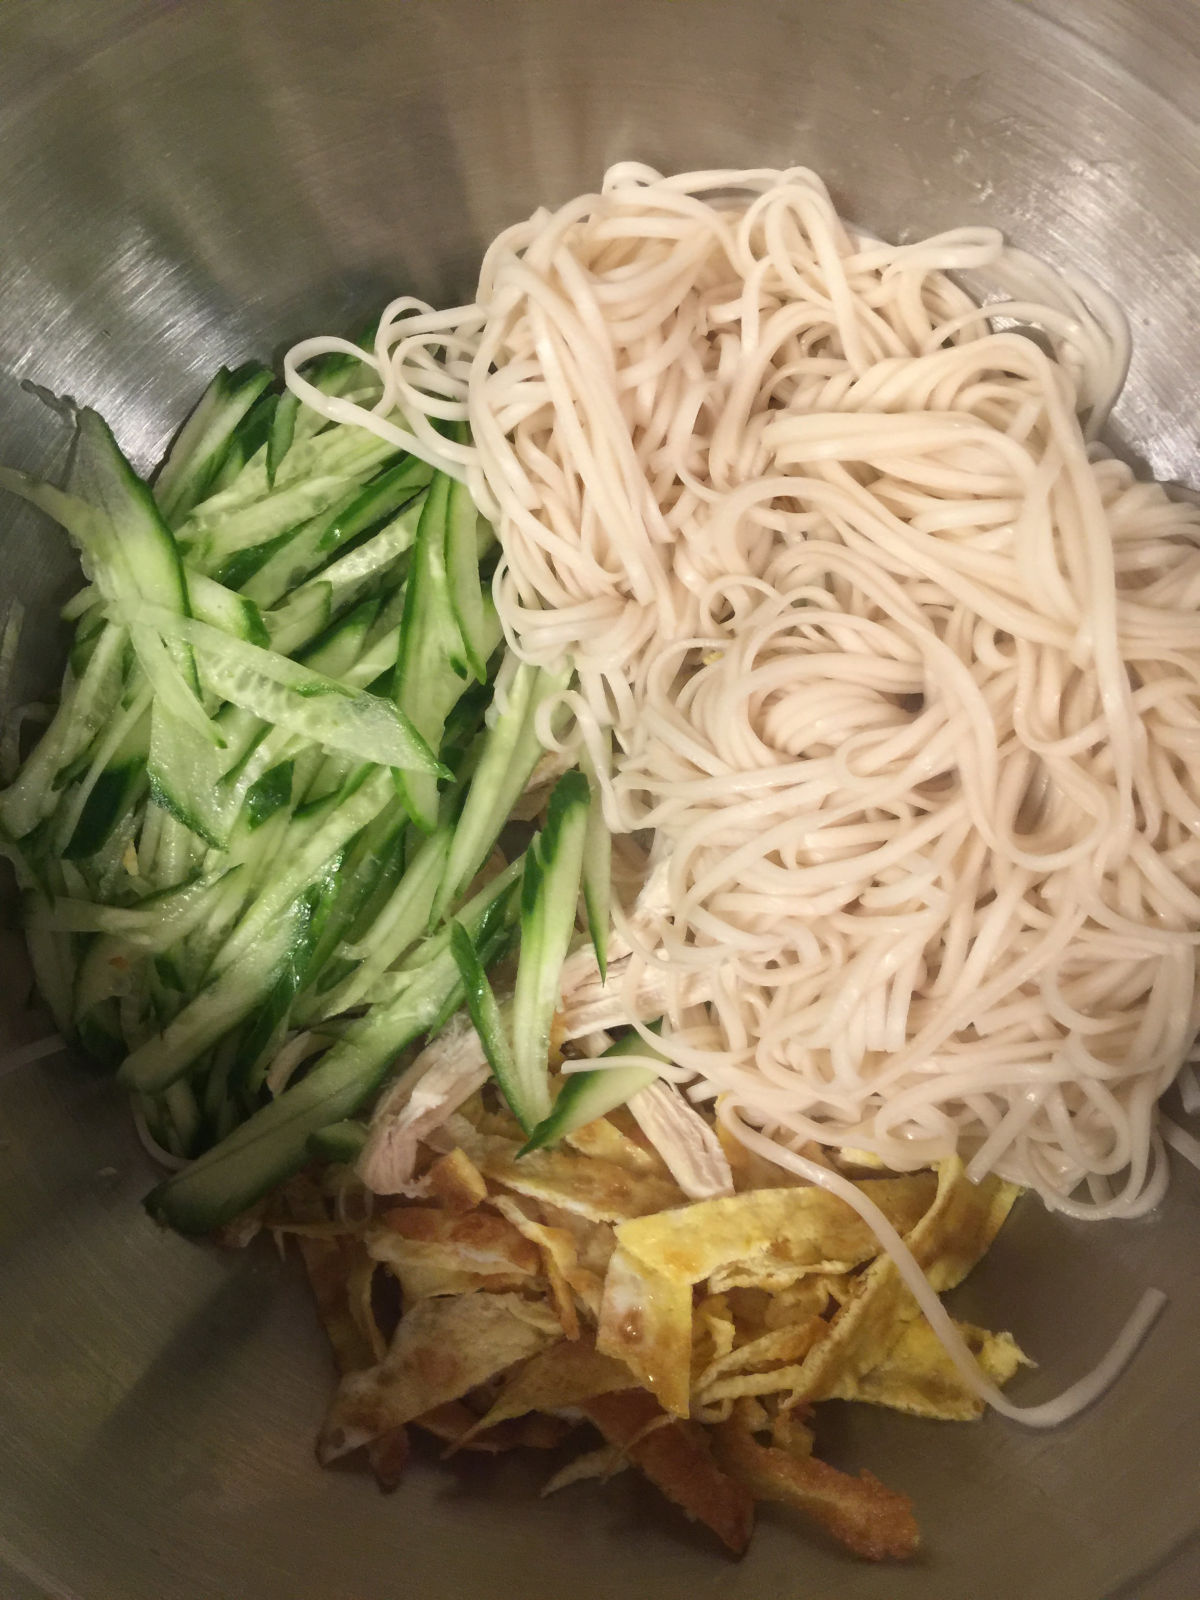 Overhead view of a large bowl with cucumber strips, shredded chicken breast, egg strips and cooked noodles.